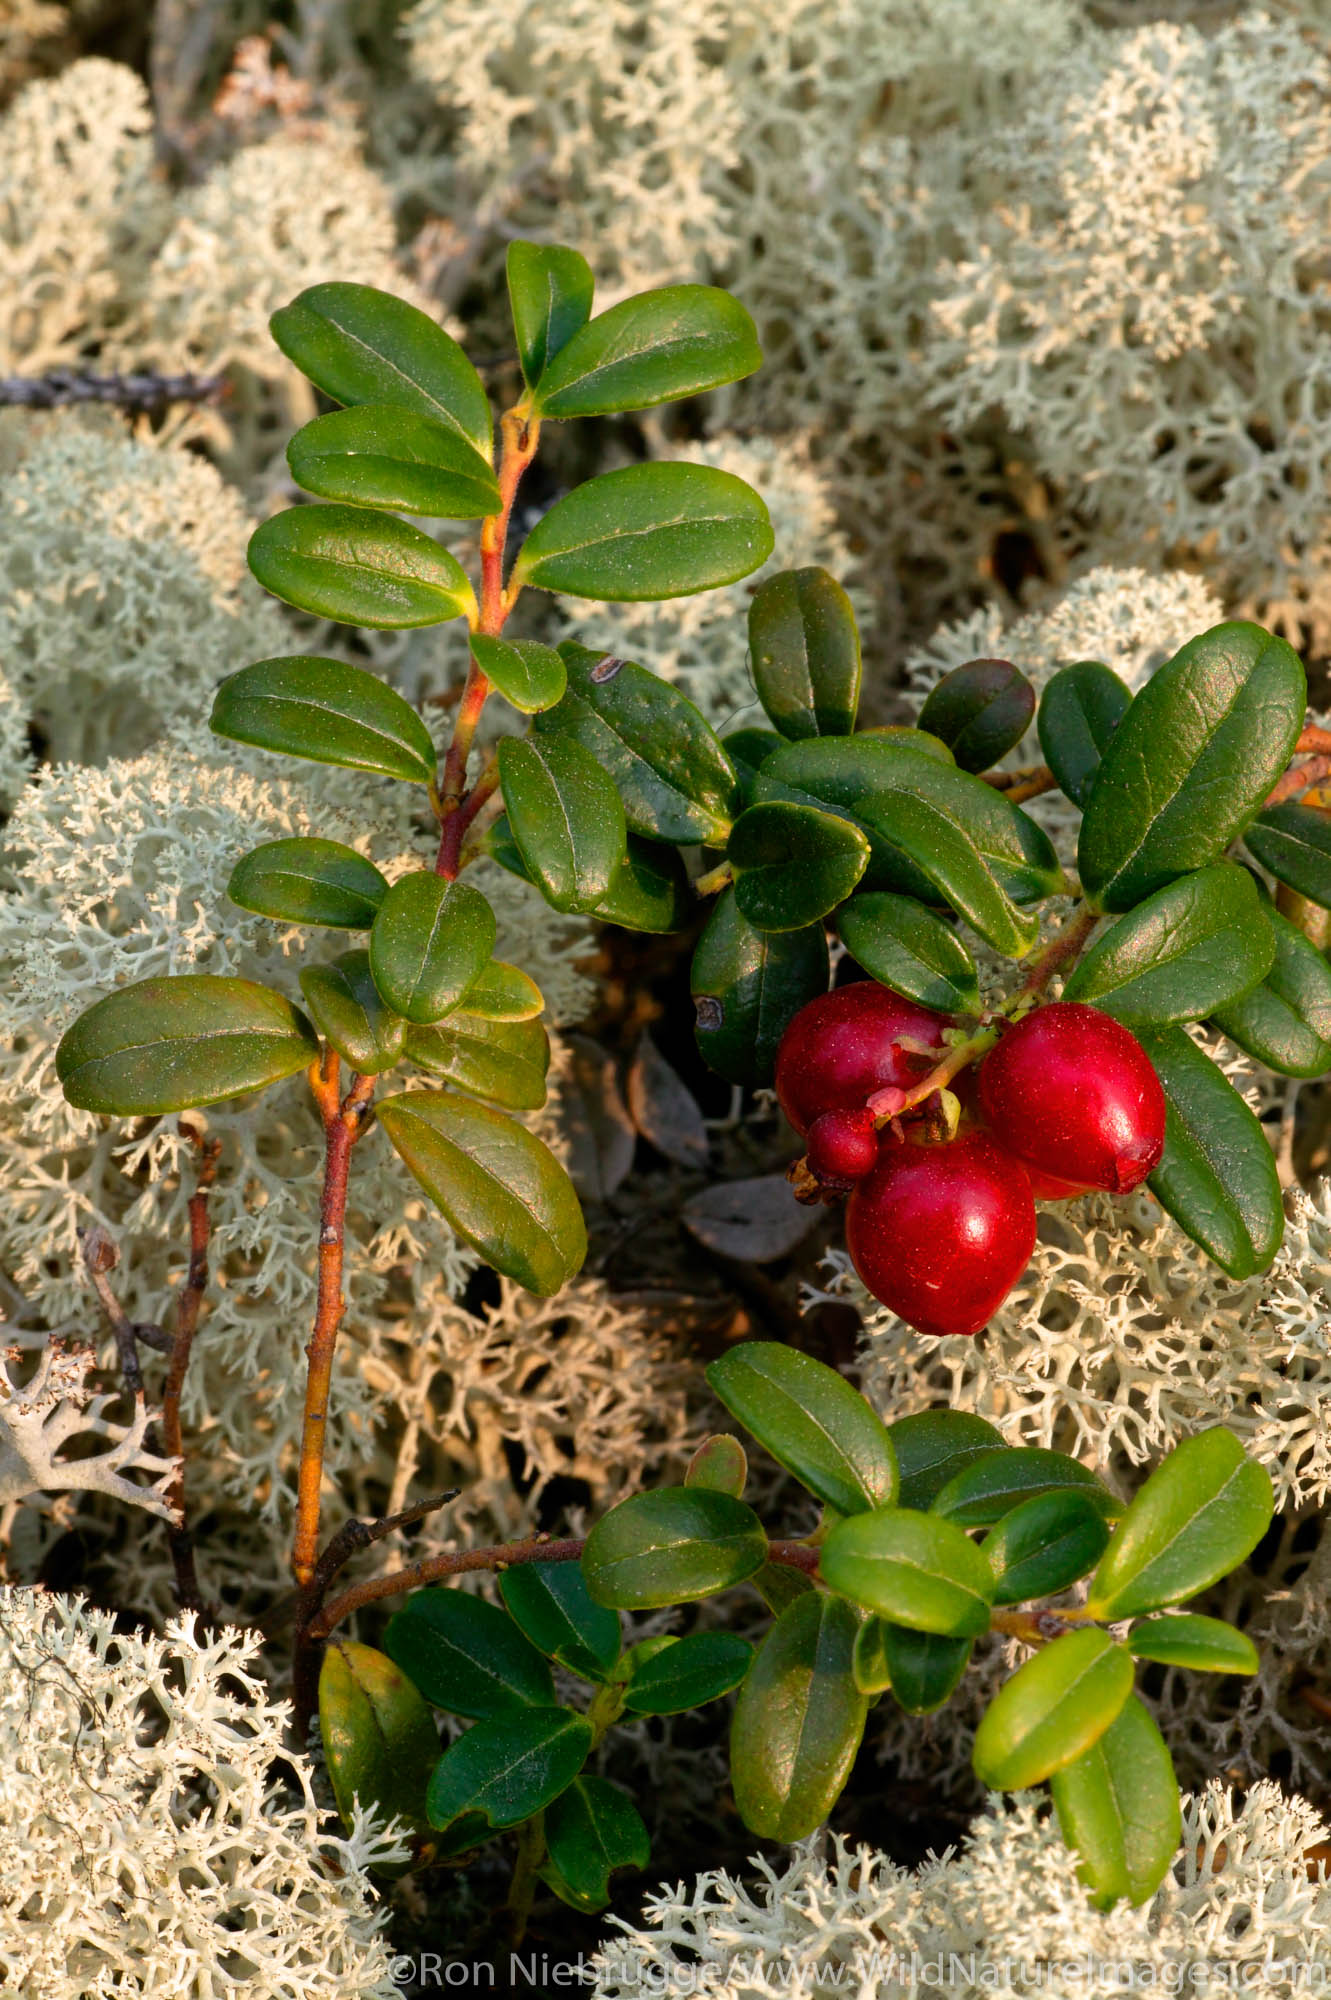 Berries grow among the Reindeer or Caribou Lichen in the Brooks Range from near the Dalton Highway, Coldfoot, Alaska.